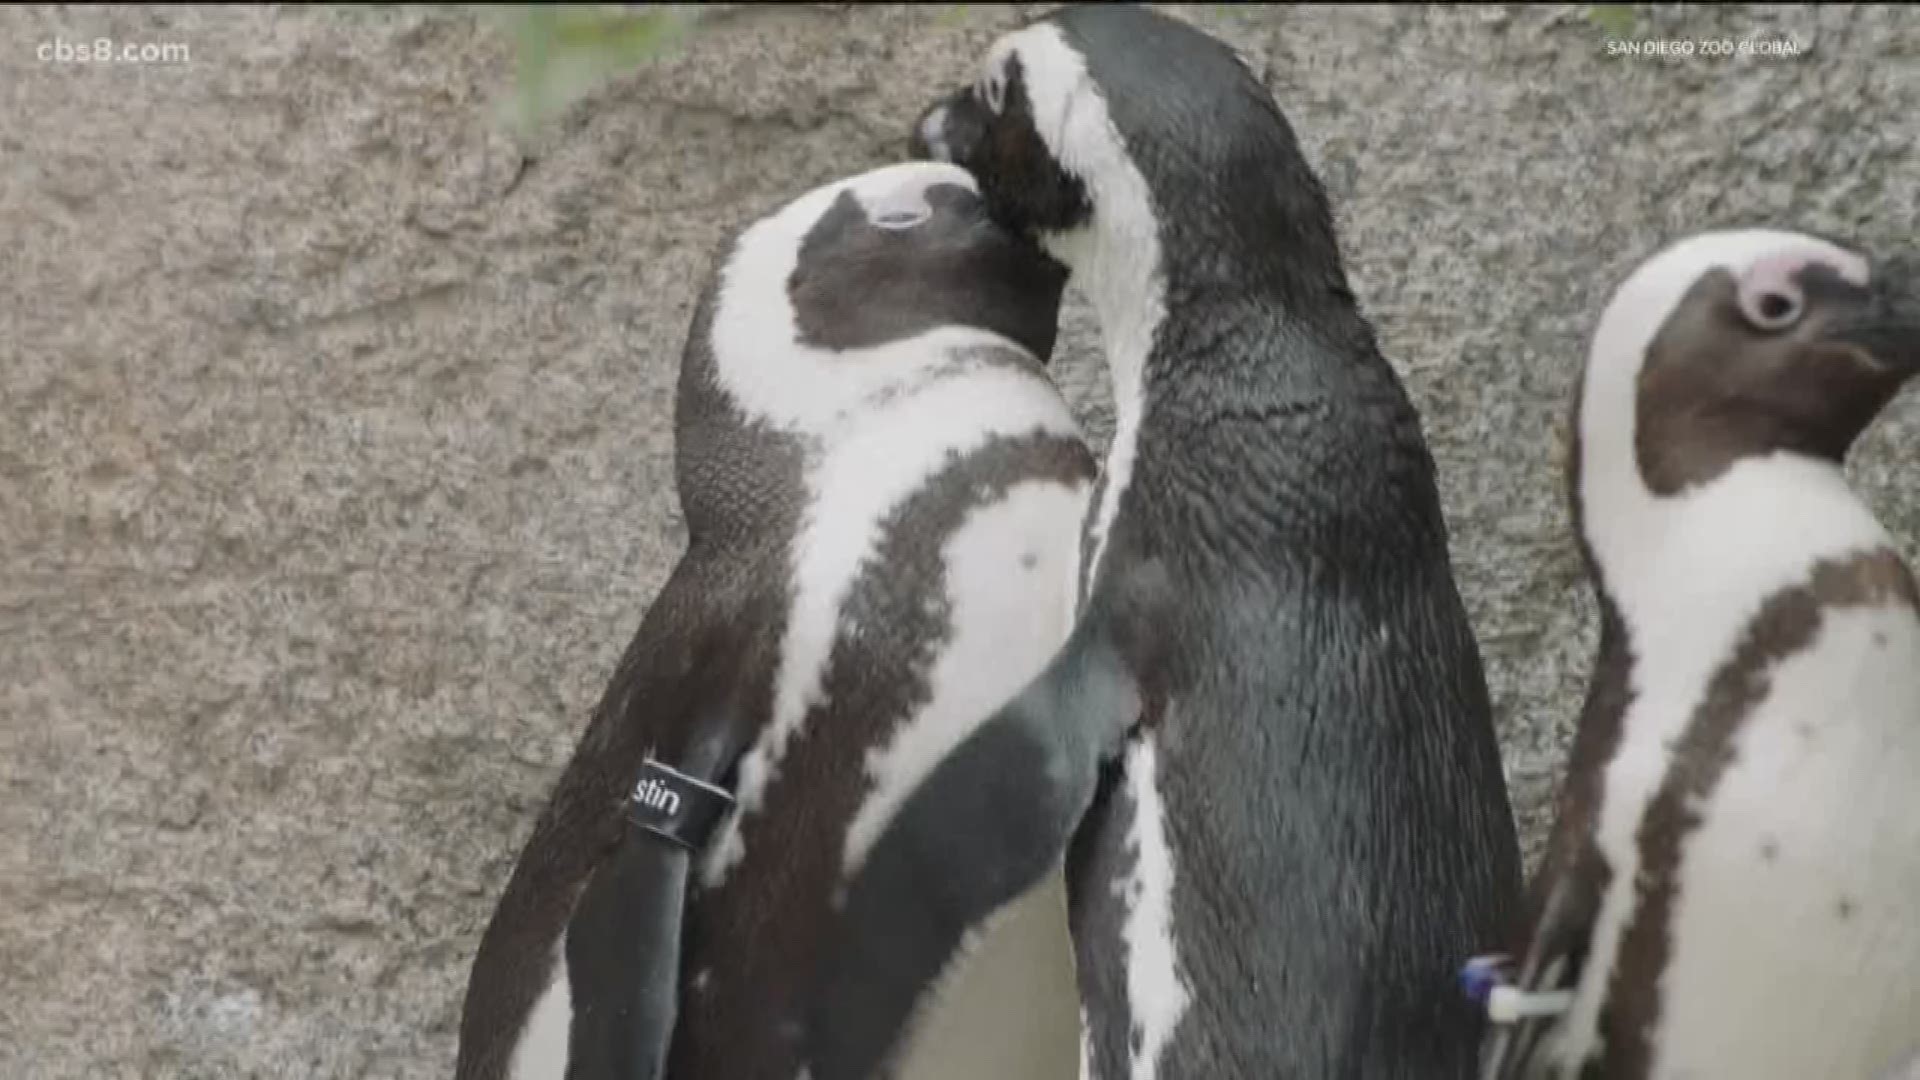 African penguins at the San Diego Zoo are getting their own reality show. That’s right – move over Kardashians!